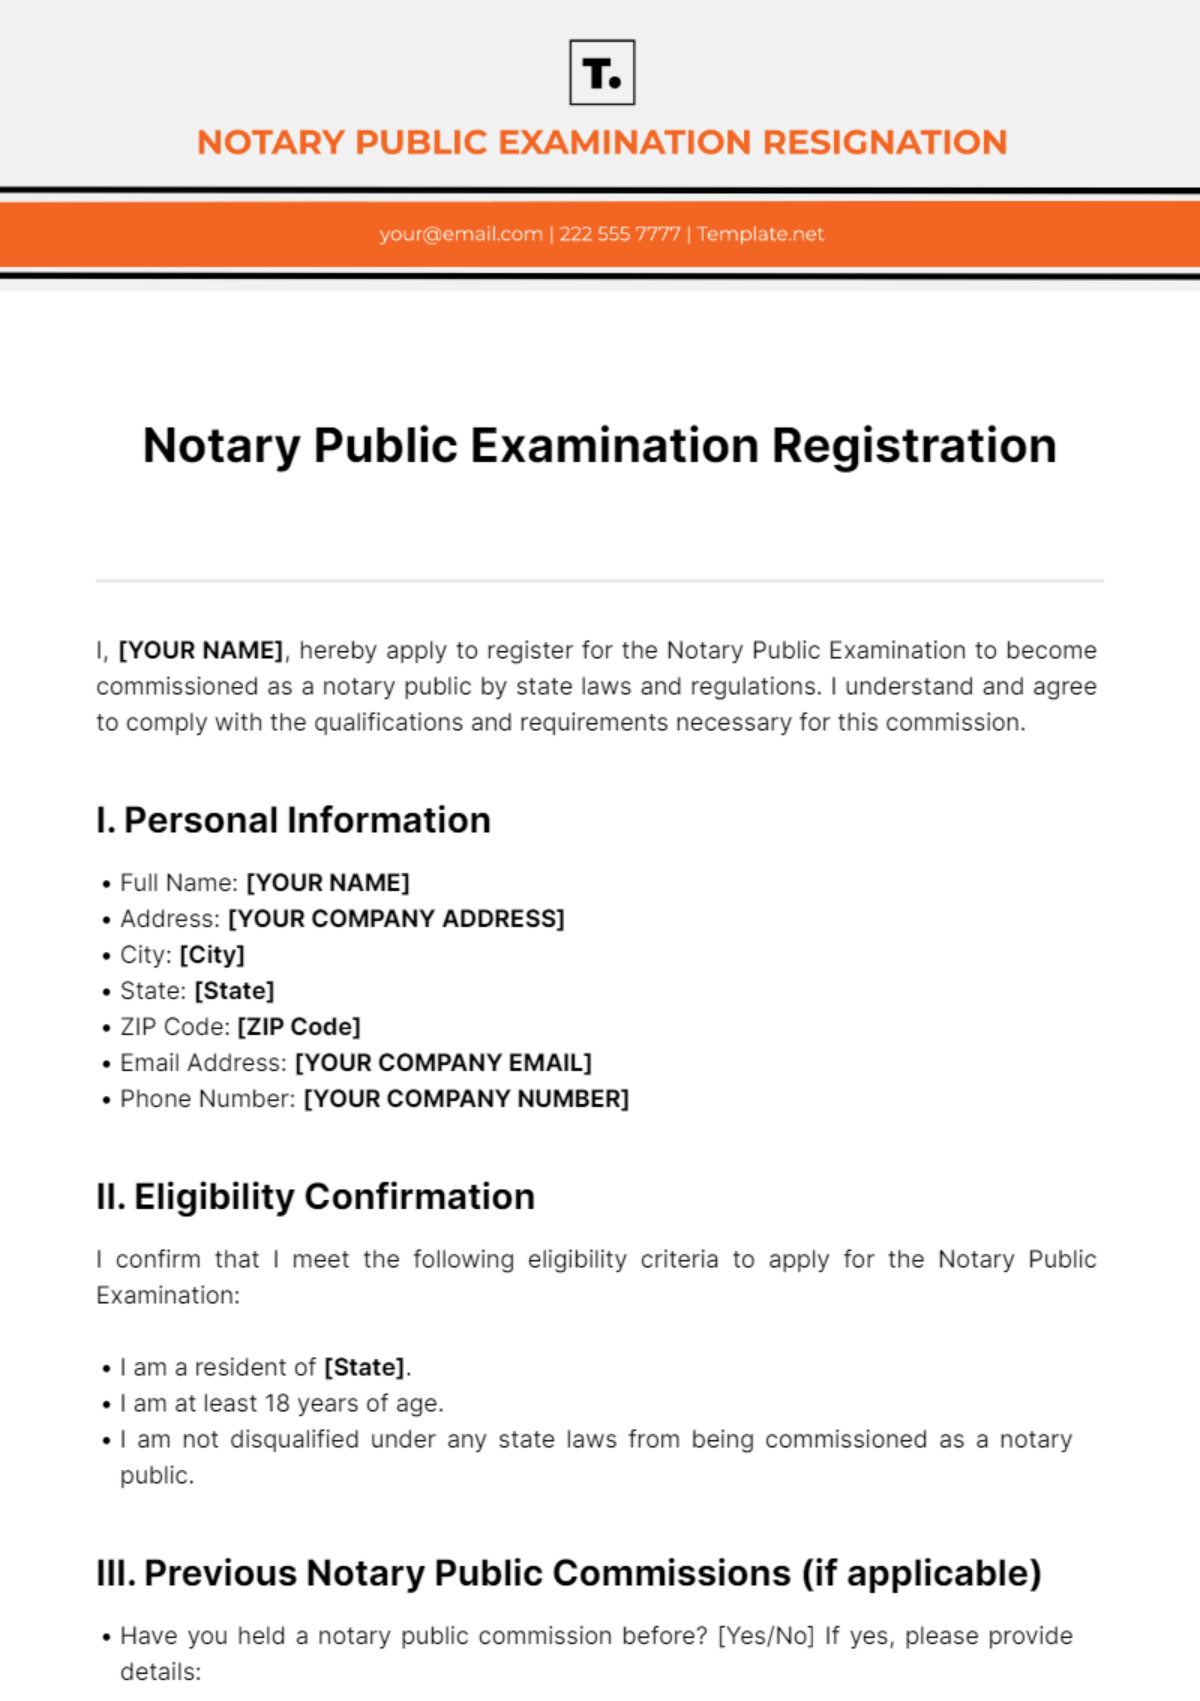 Free Notary Public Examination Registration Template